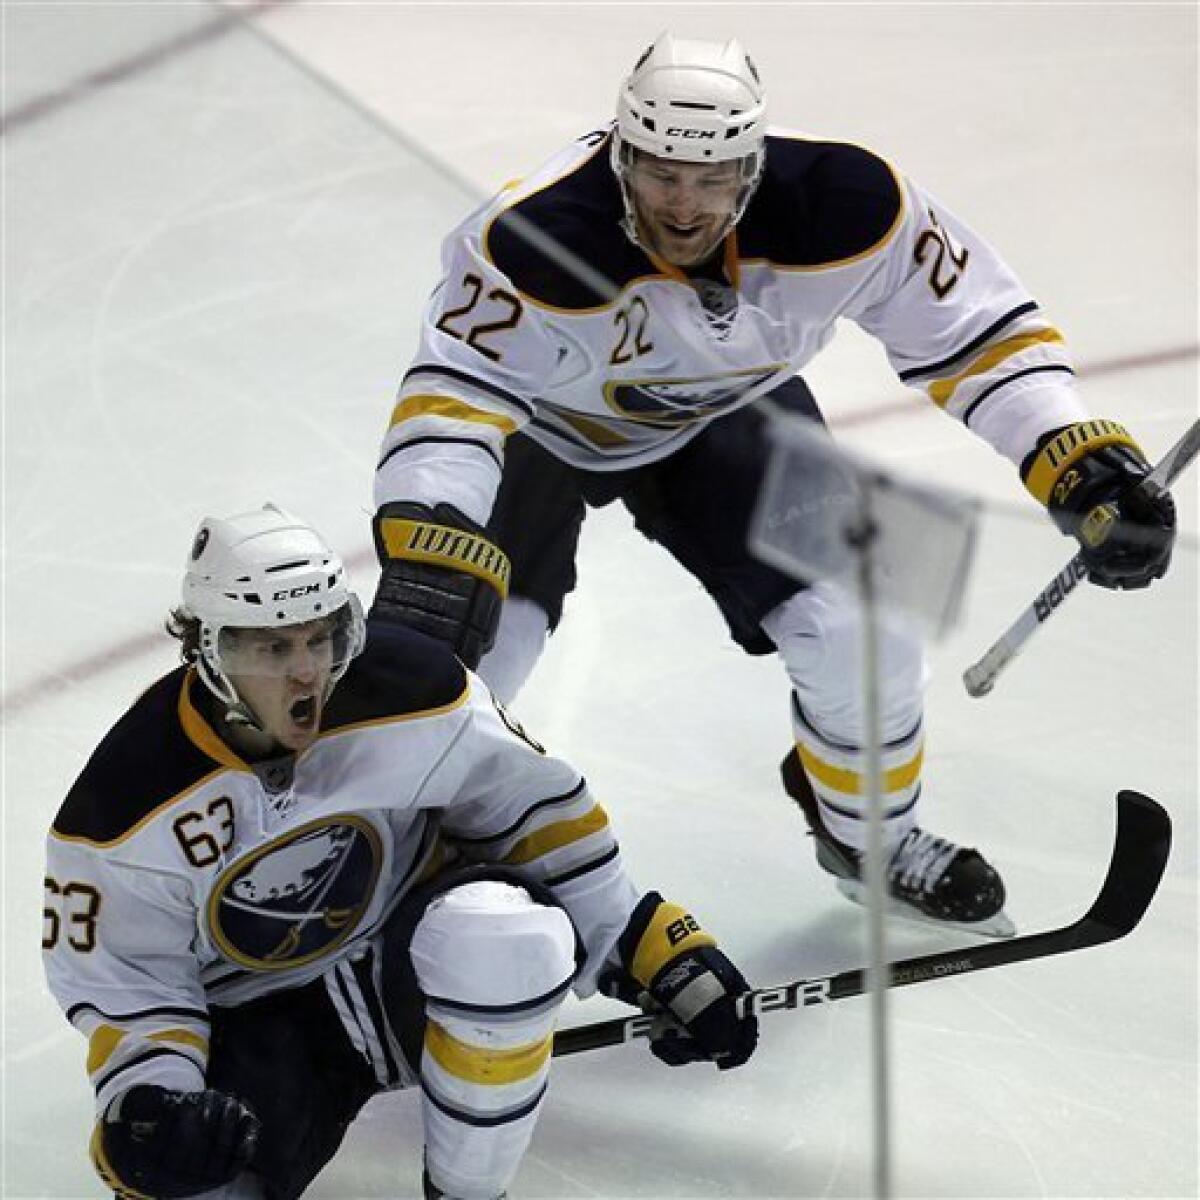 Tyler Ennis Hockey Stats and Profile at